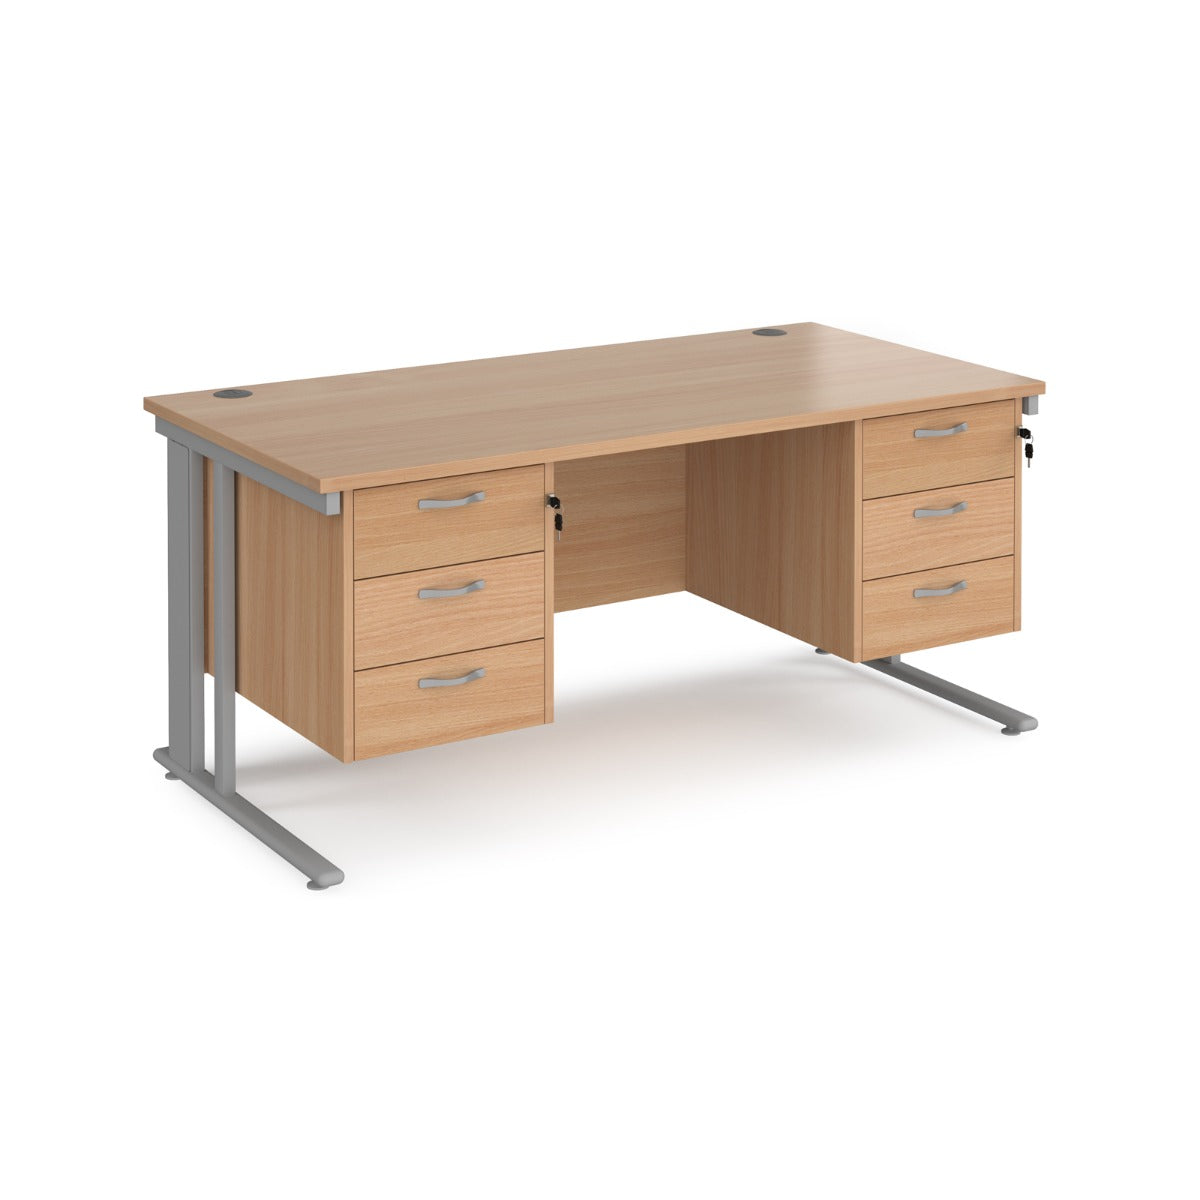 Maestro 800mm Deep Straight Cable Management Leg Office Desk with Three and Three Drawer Pedestal